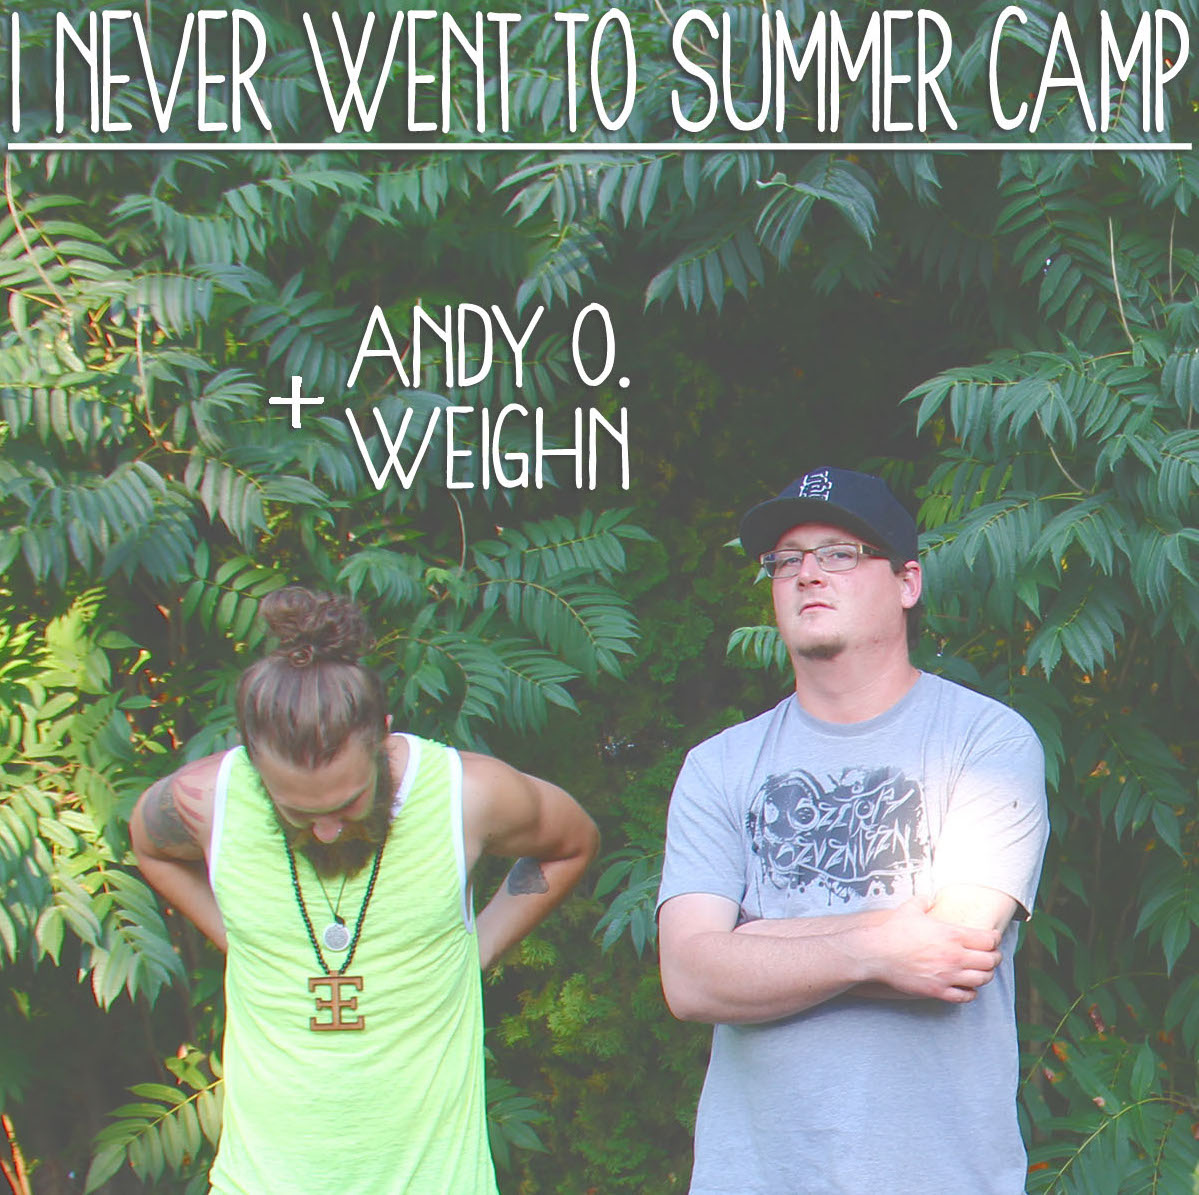 Andy O. x Weighn - "I Never Went To Summer Camp" (Release) | @AndyO_TheHammer